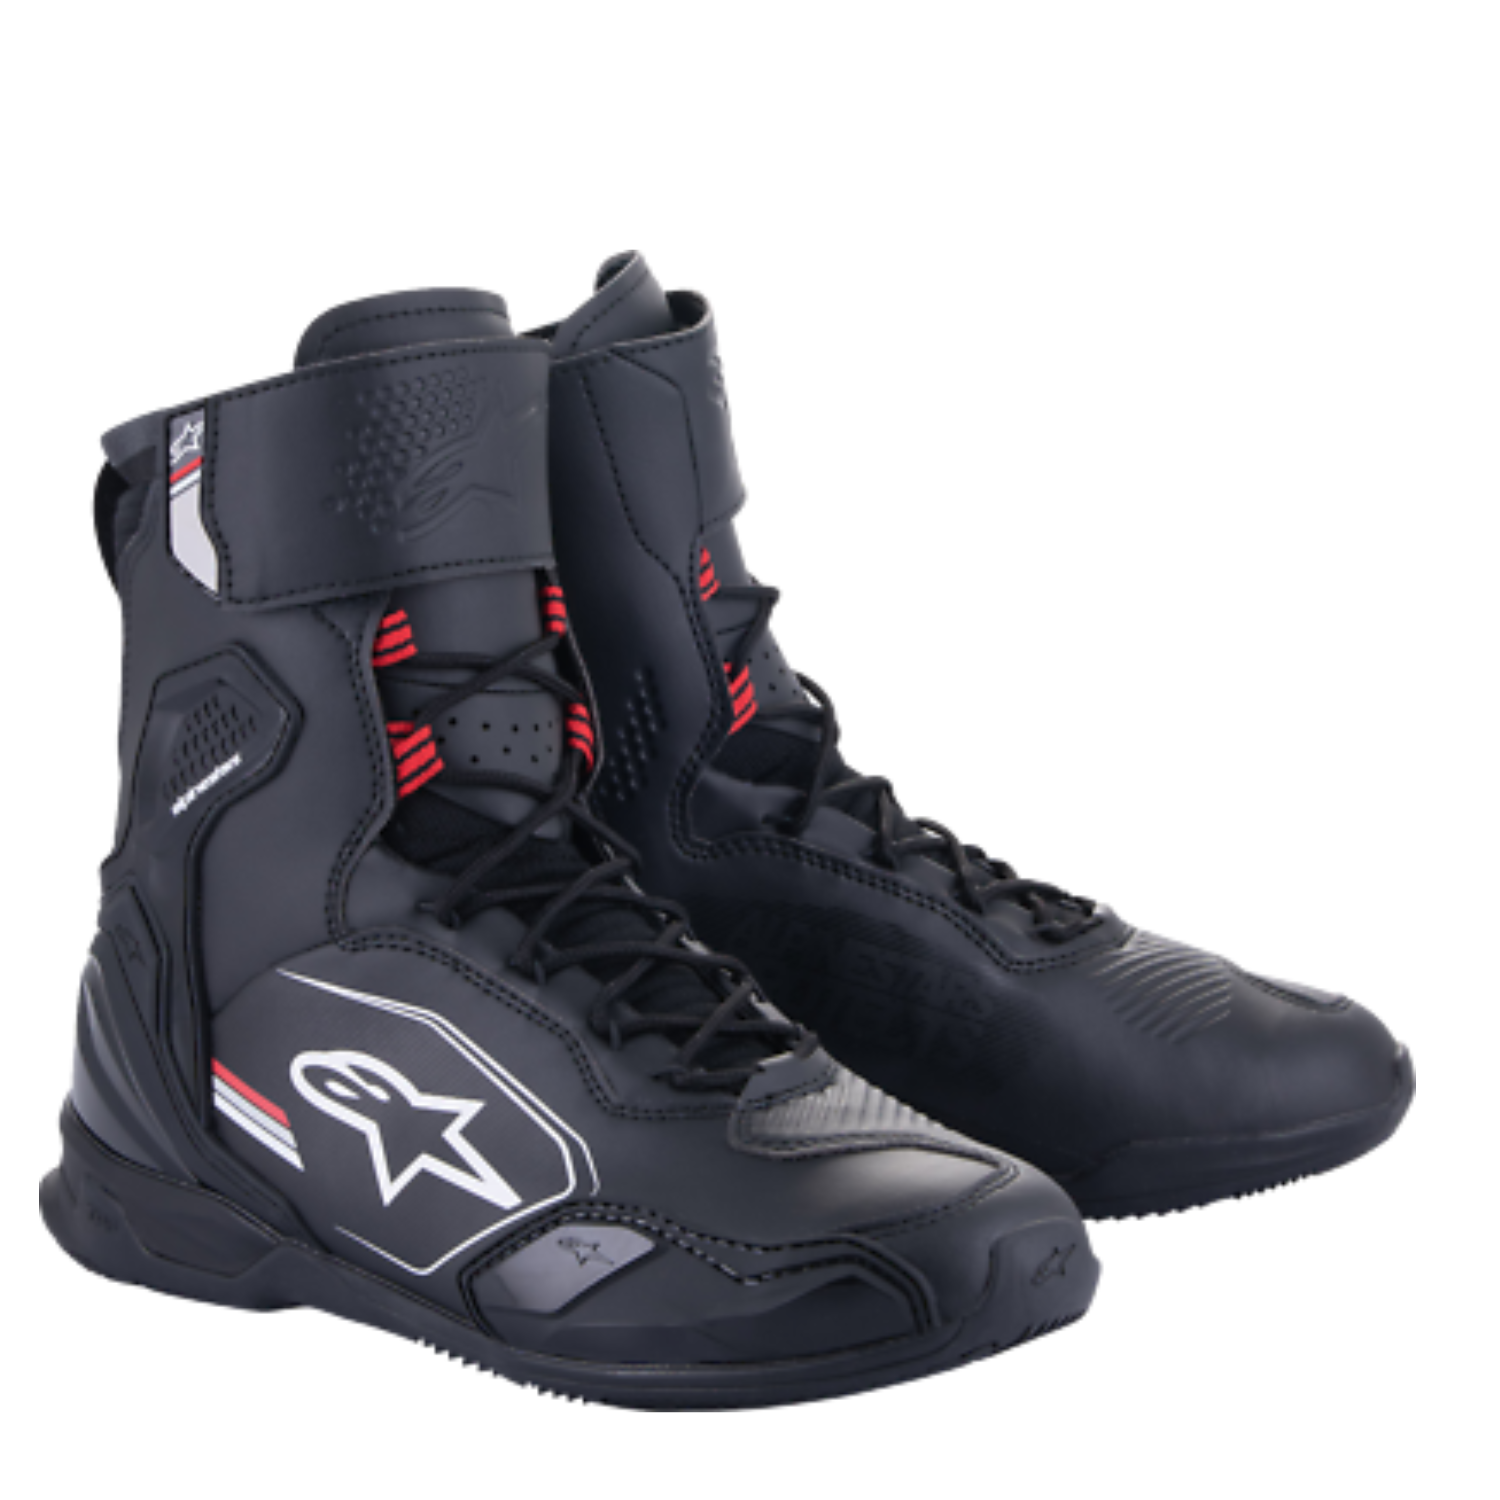 Image of Alpinestars Superfaster Shoes Black Gray Bright Red Size US 12 ID 8059347260853